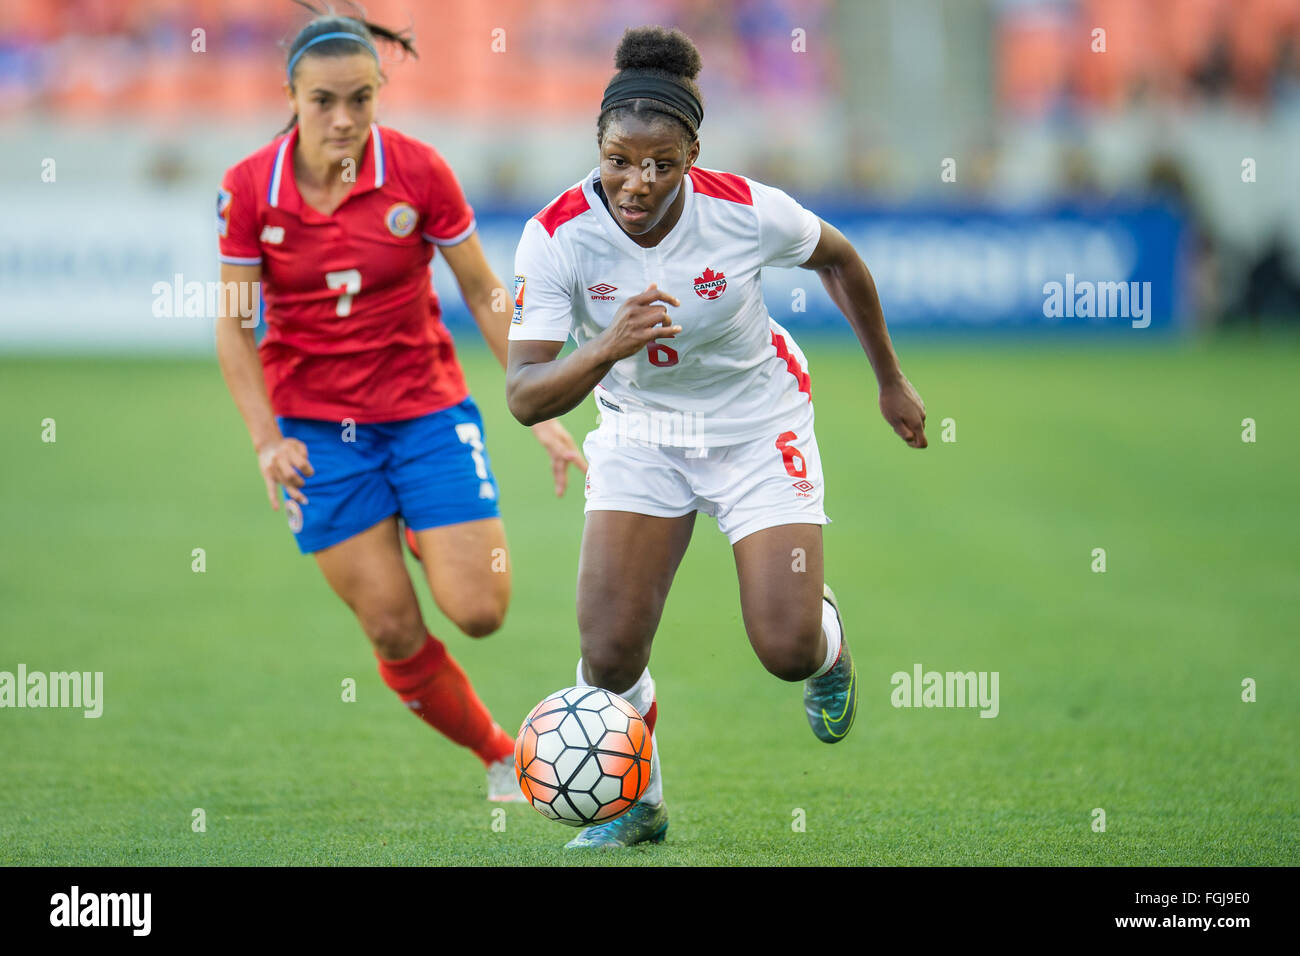 Houston, TX, USA. 19th Feb, 2016. Canada forward Deanne Rose (6) controls the ball in front of Costa Rica forward Melissa Herrera (7) during a semi-final CONCACAF Olympic Qualifying soccer match between Canada and Costa Rica at BBVA Compass Stadium in Houston, TX. Trask Smith/CSM/Alamy Live News Stock Photo